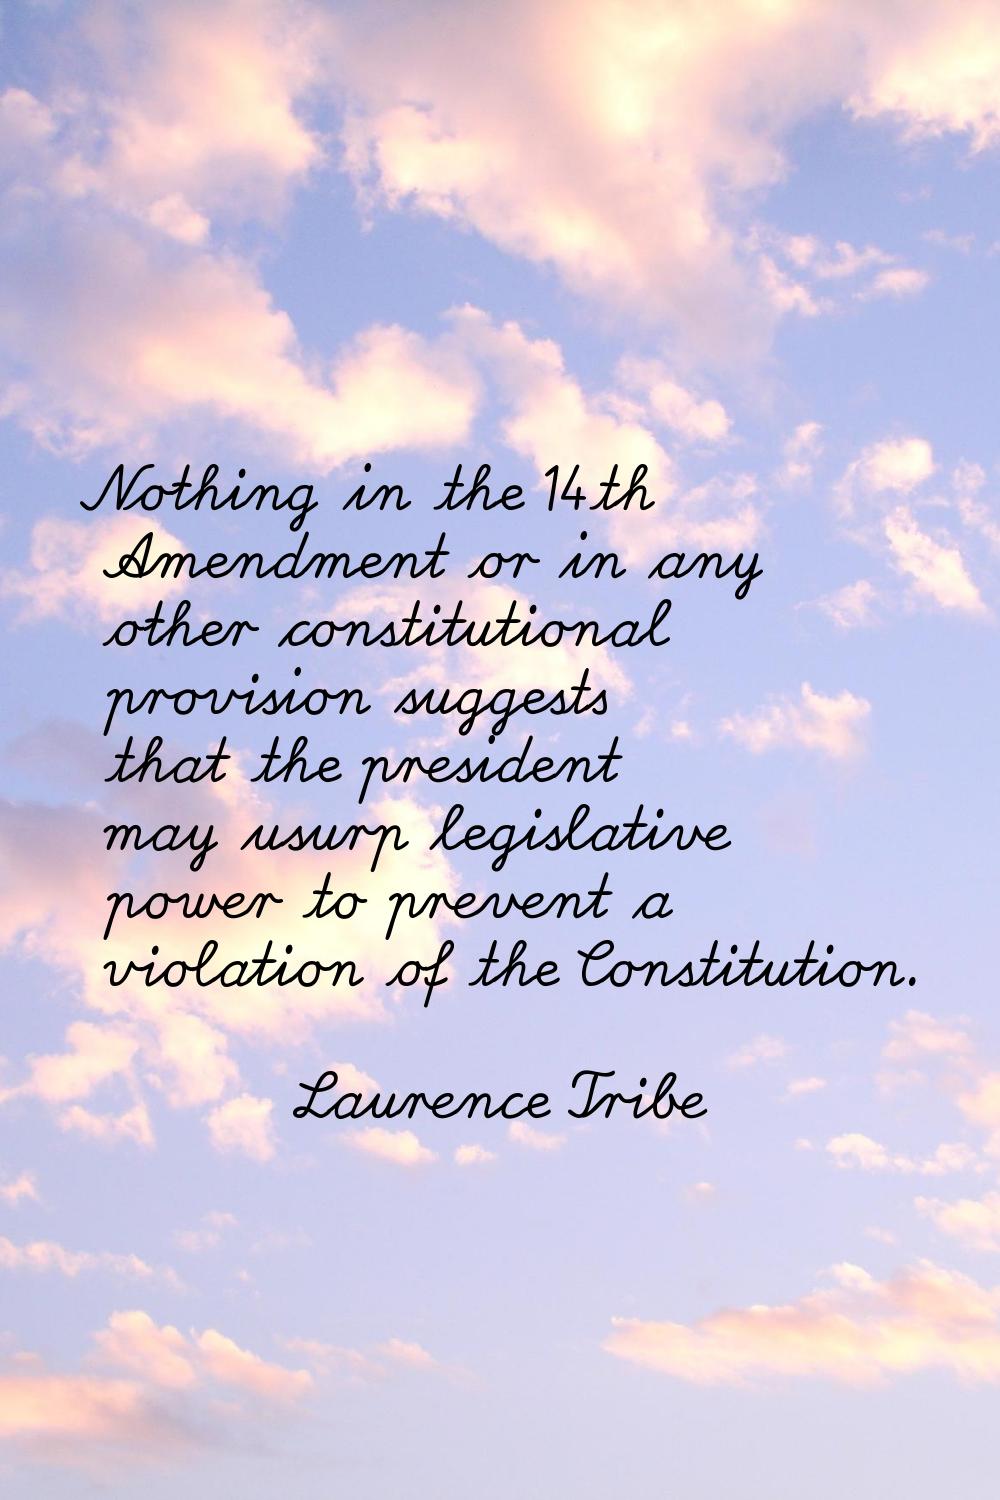 Nothing in the 14th Amendment or in any other constitutional provision suggests that the president 